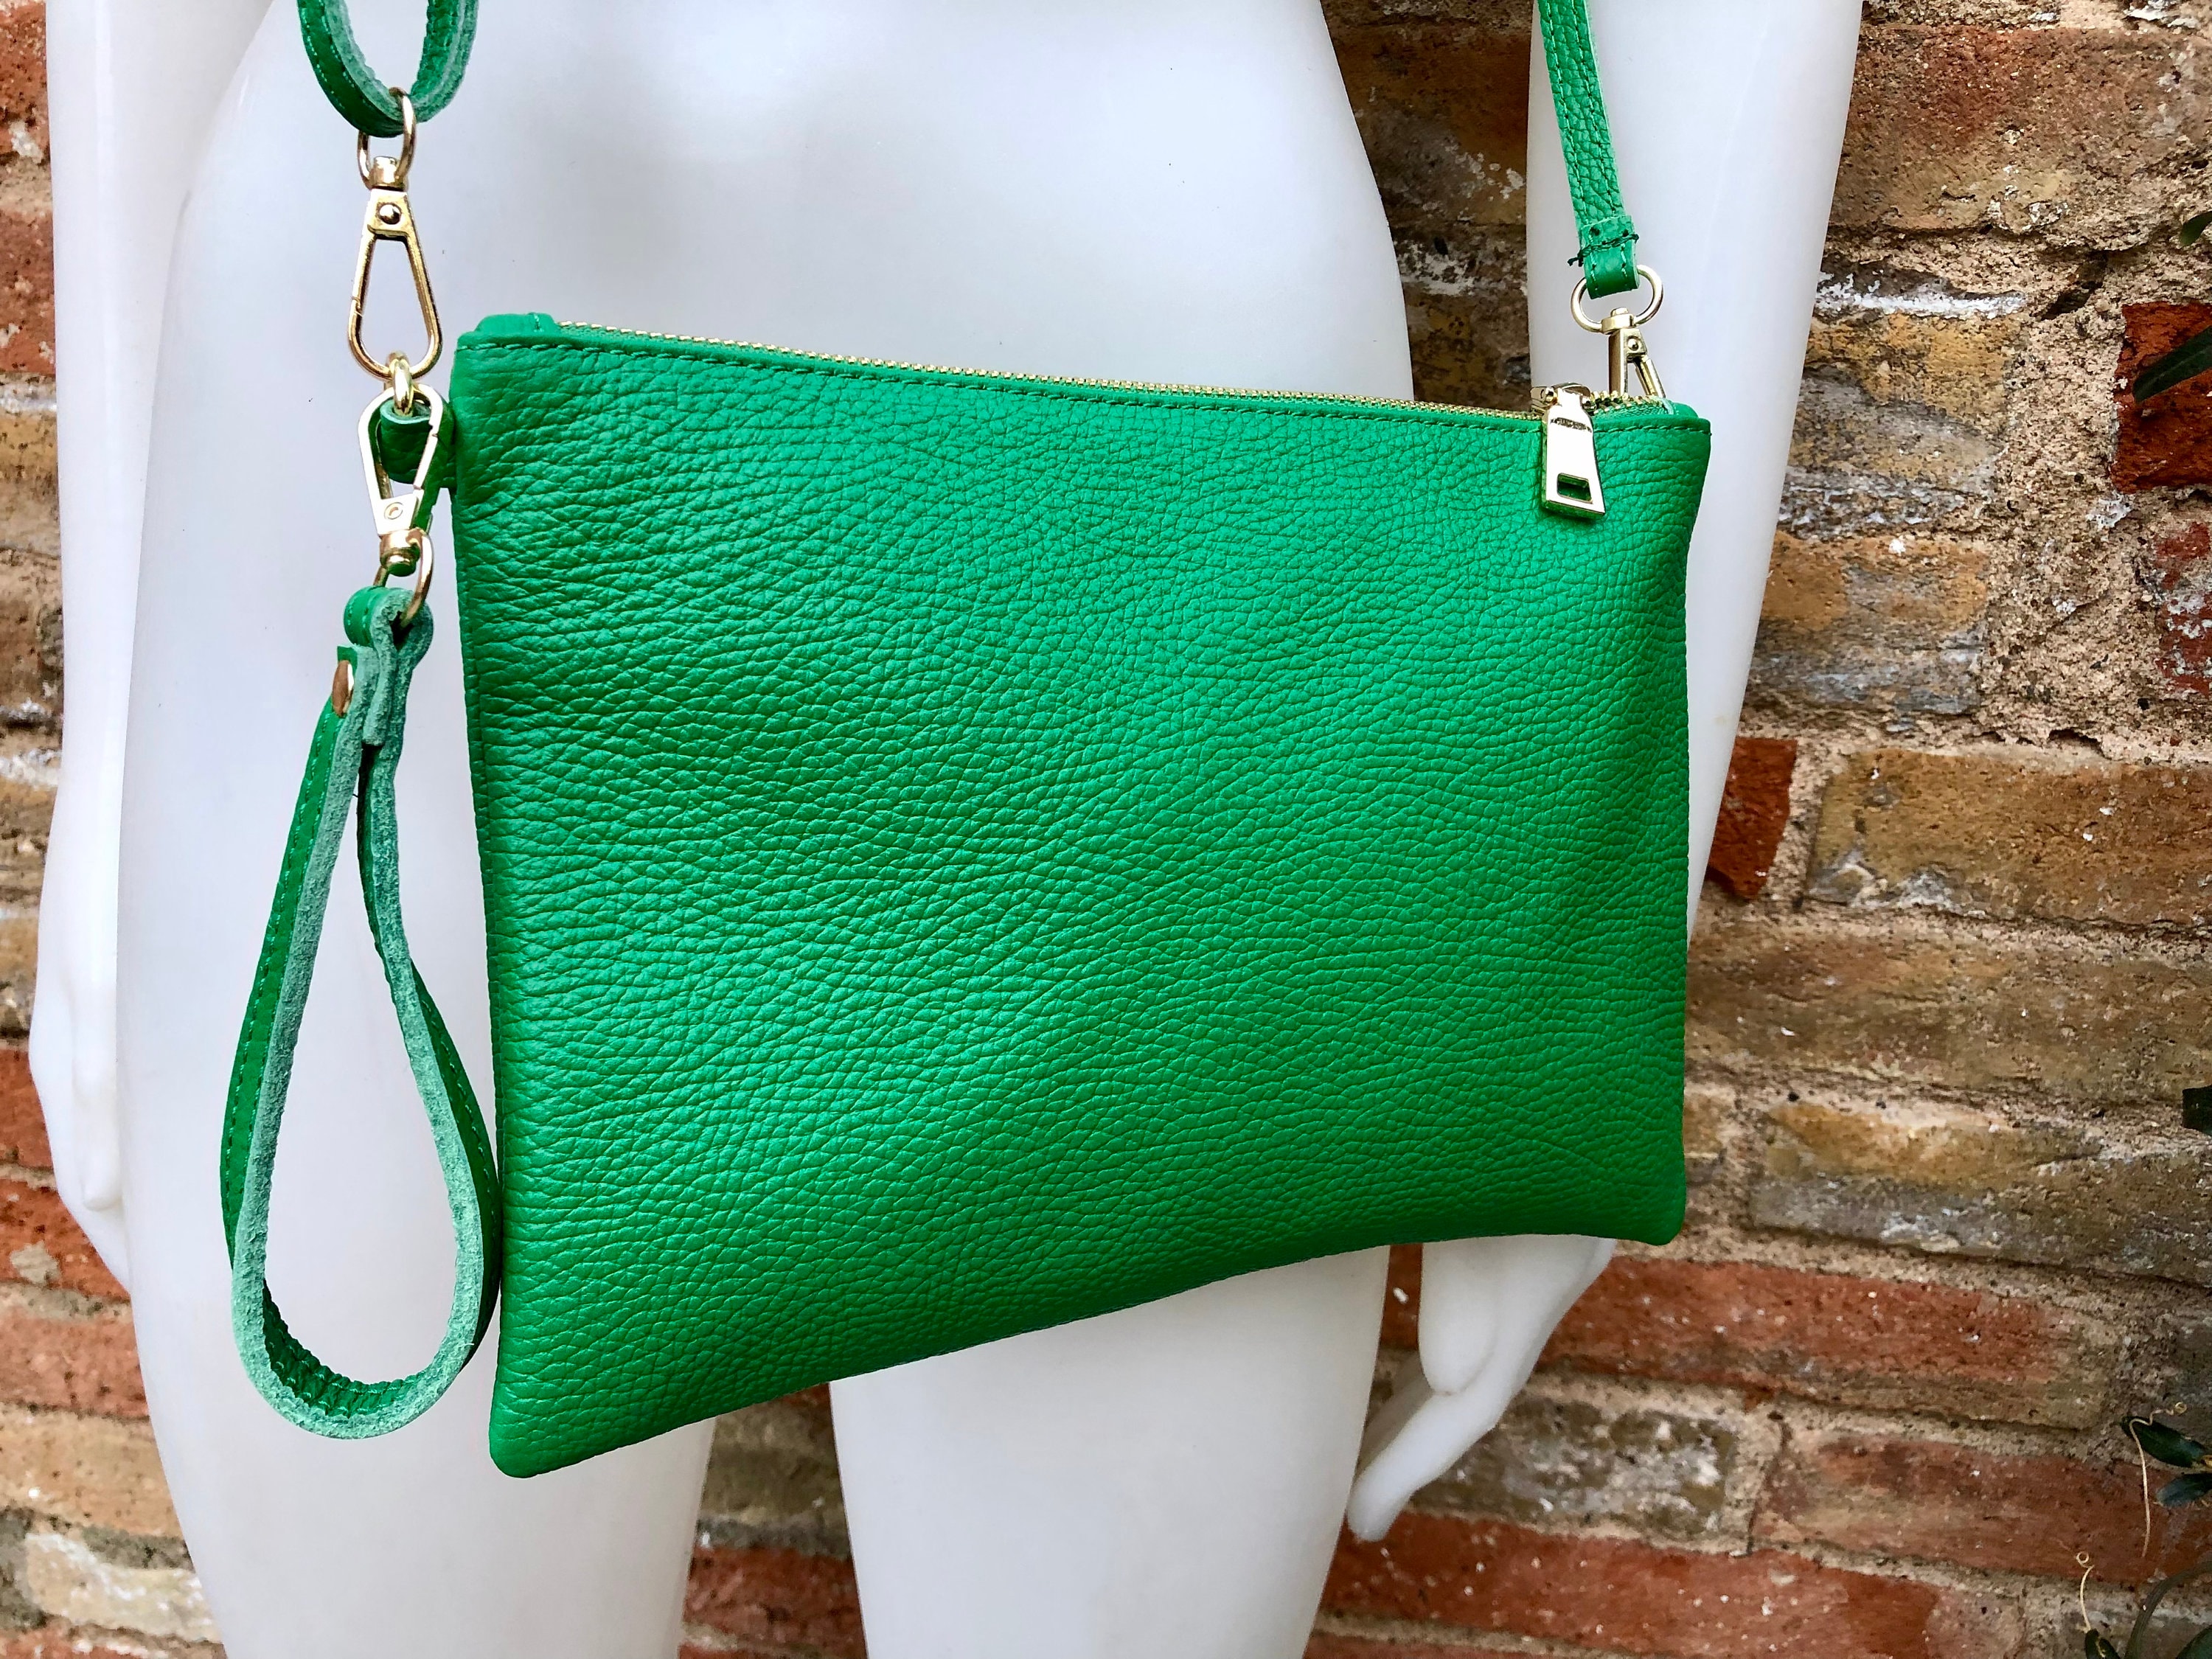 Small Leather Bag in GREEN .cross Body Bag Shoulder Bag or - Etsy